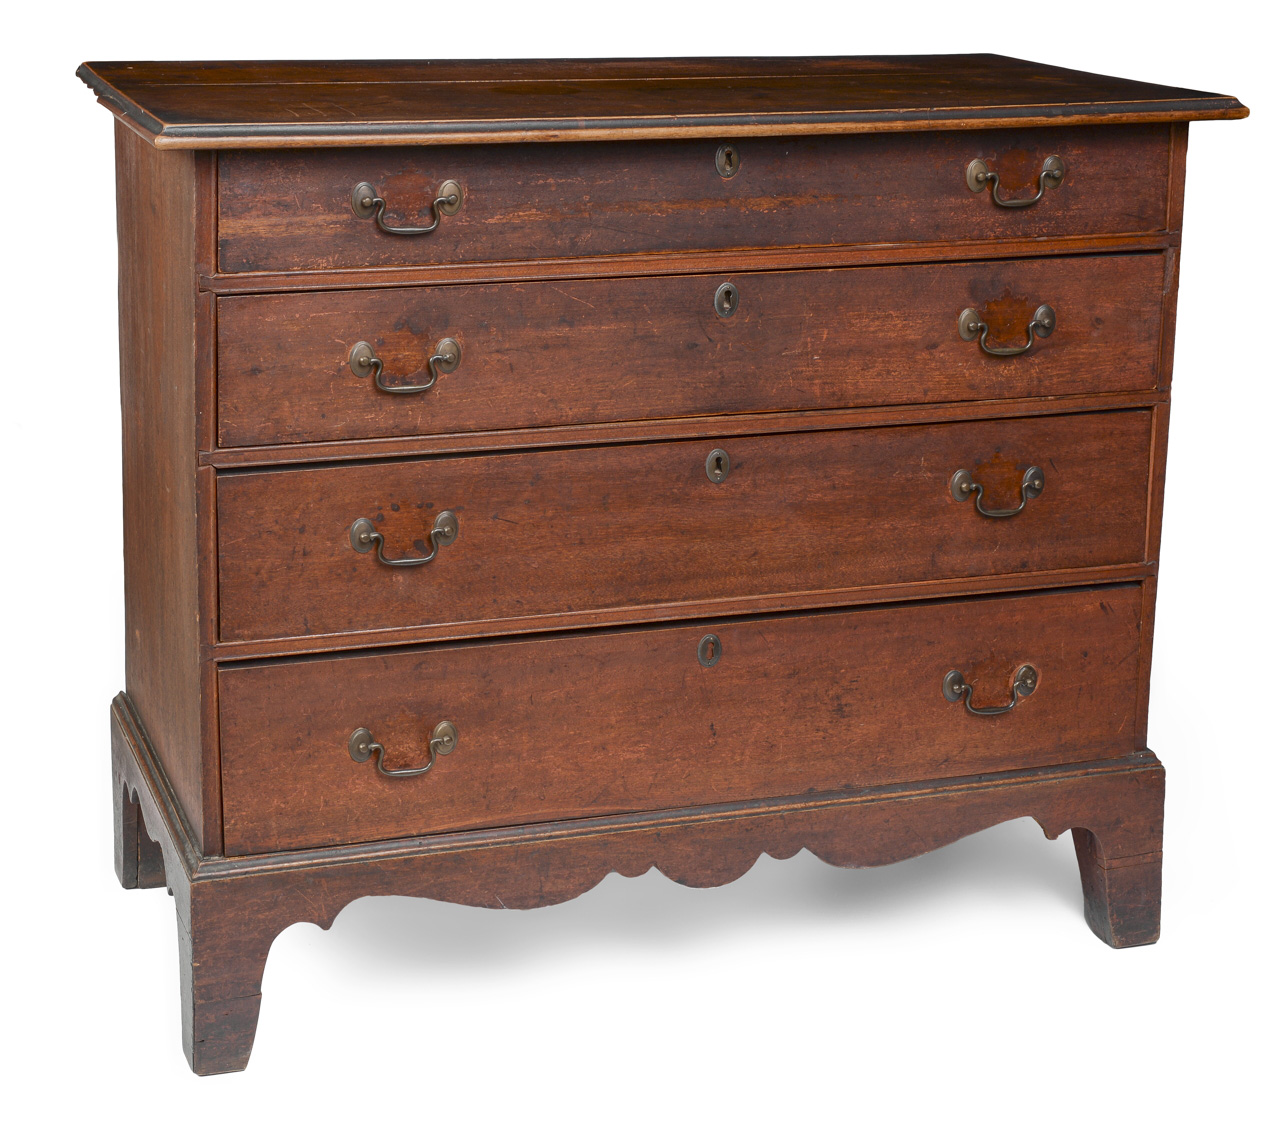 A classic country Chippendale New Hampshire four drawer chest